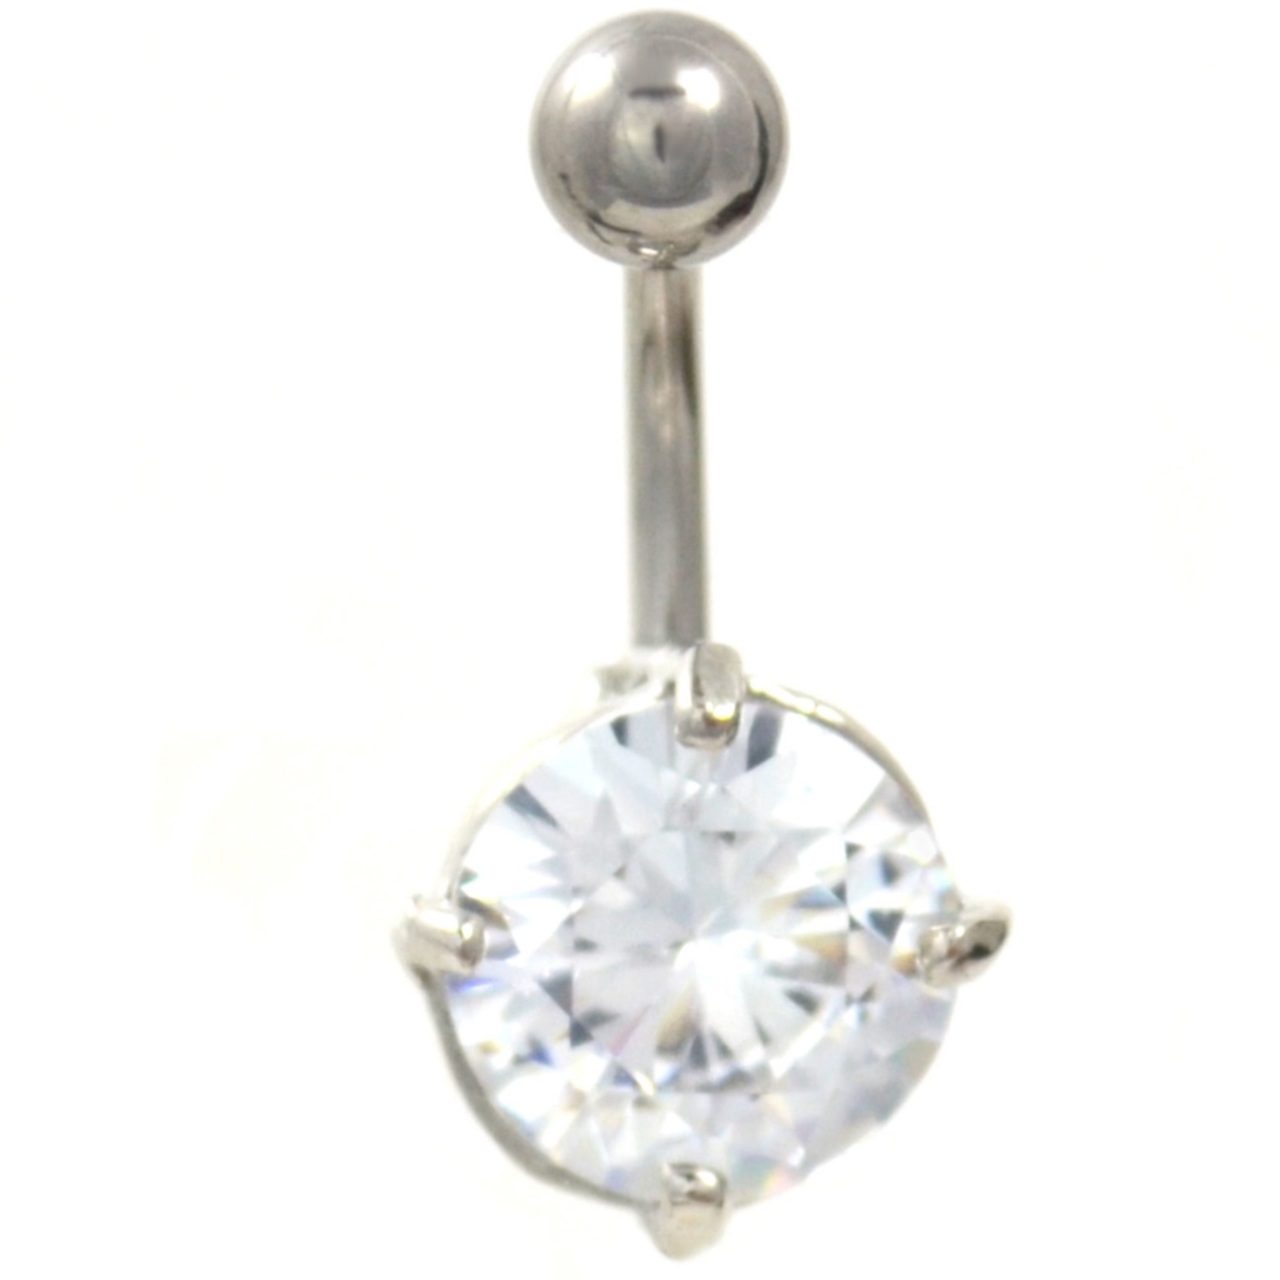 10mm Prong Set Clear Gem Stone Belly Ring | BodyDazz.com